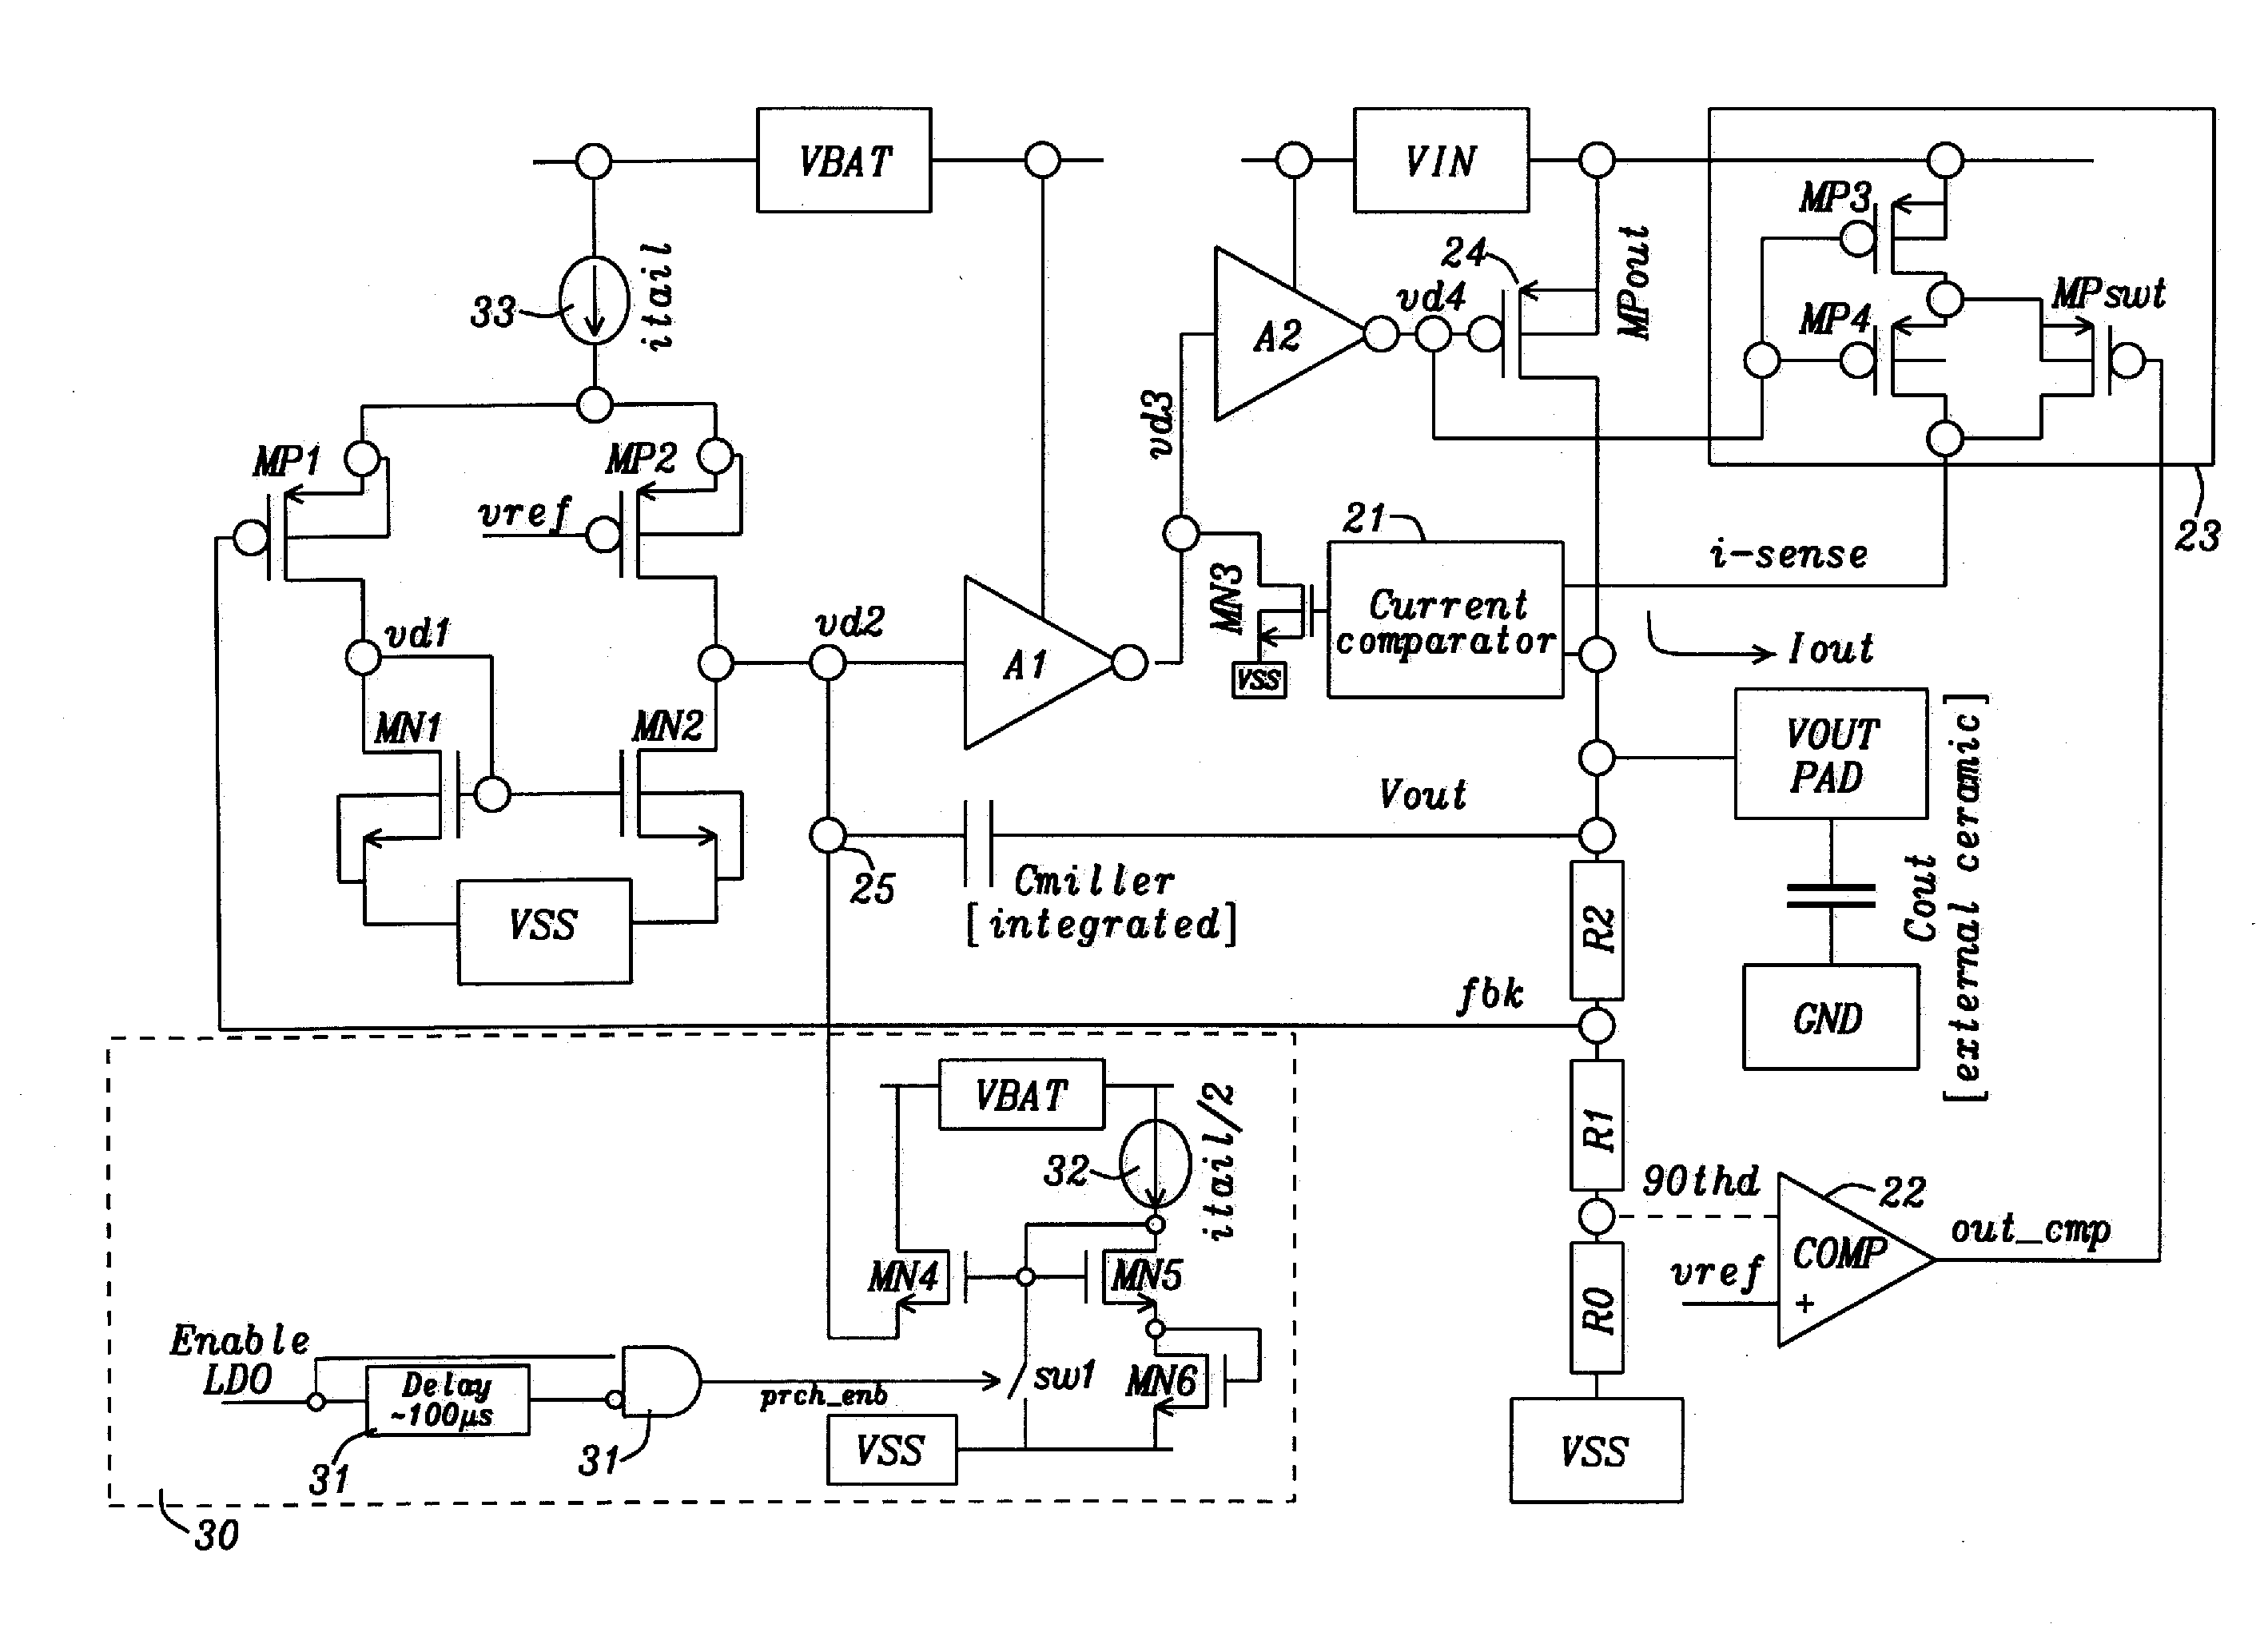 Method to Limit the Inrush Current in Large Output Capacitance LDO's